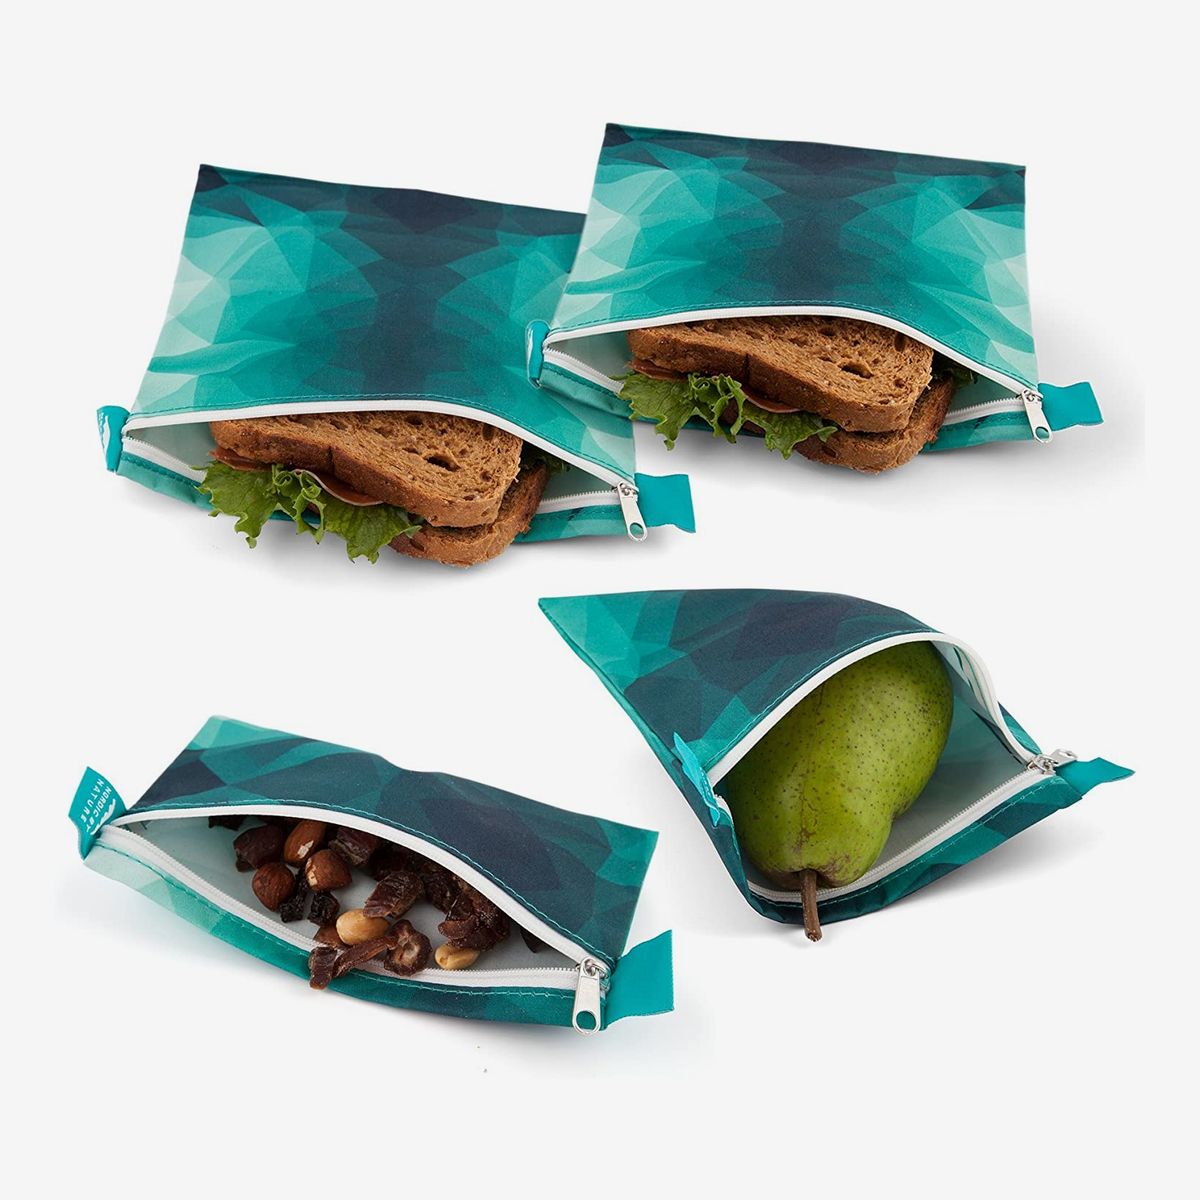 Lot 2 Fit & Fresh Reusable Sandwich And Snack Bags 2 Packs Plastic Bag